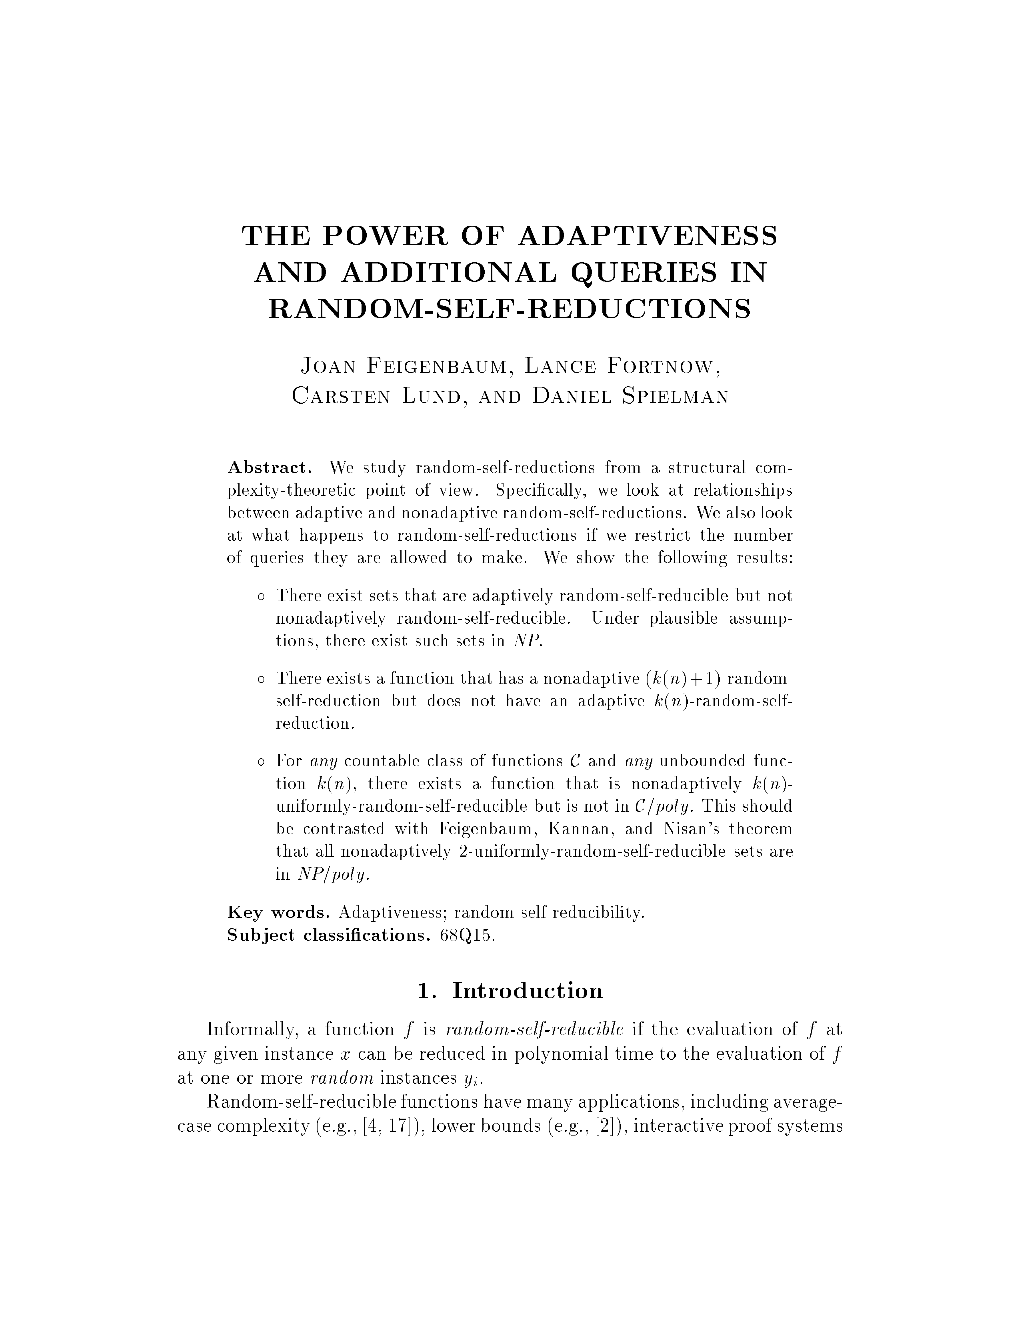 The Power of Adaptiveness and Additional Queries in Random�Self